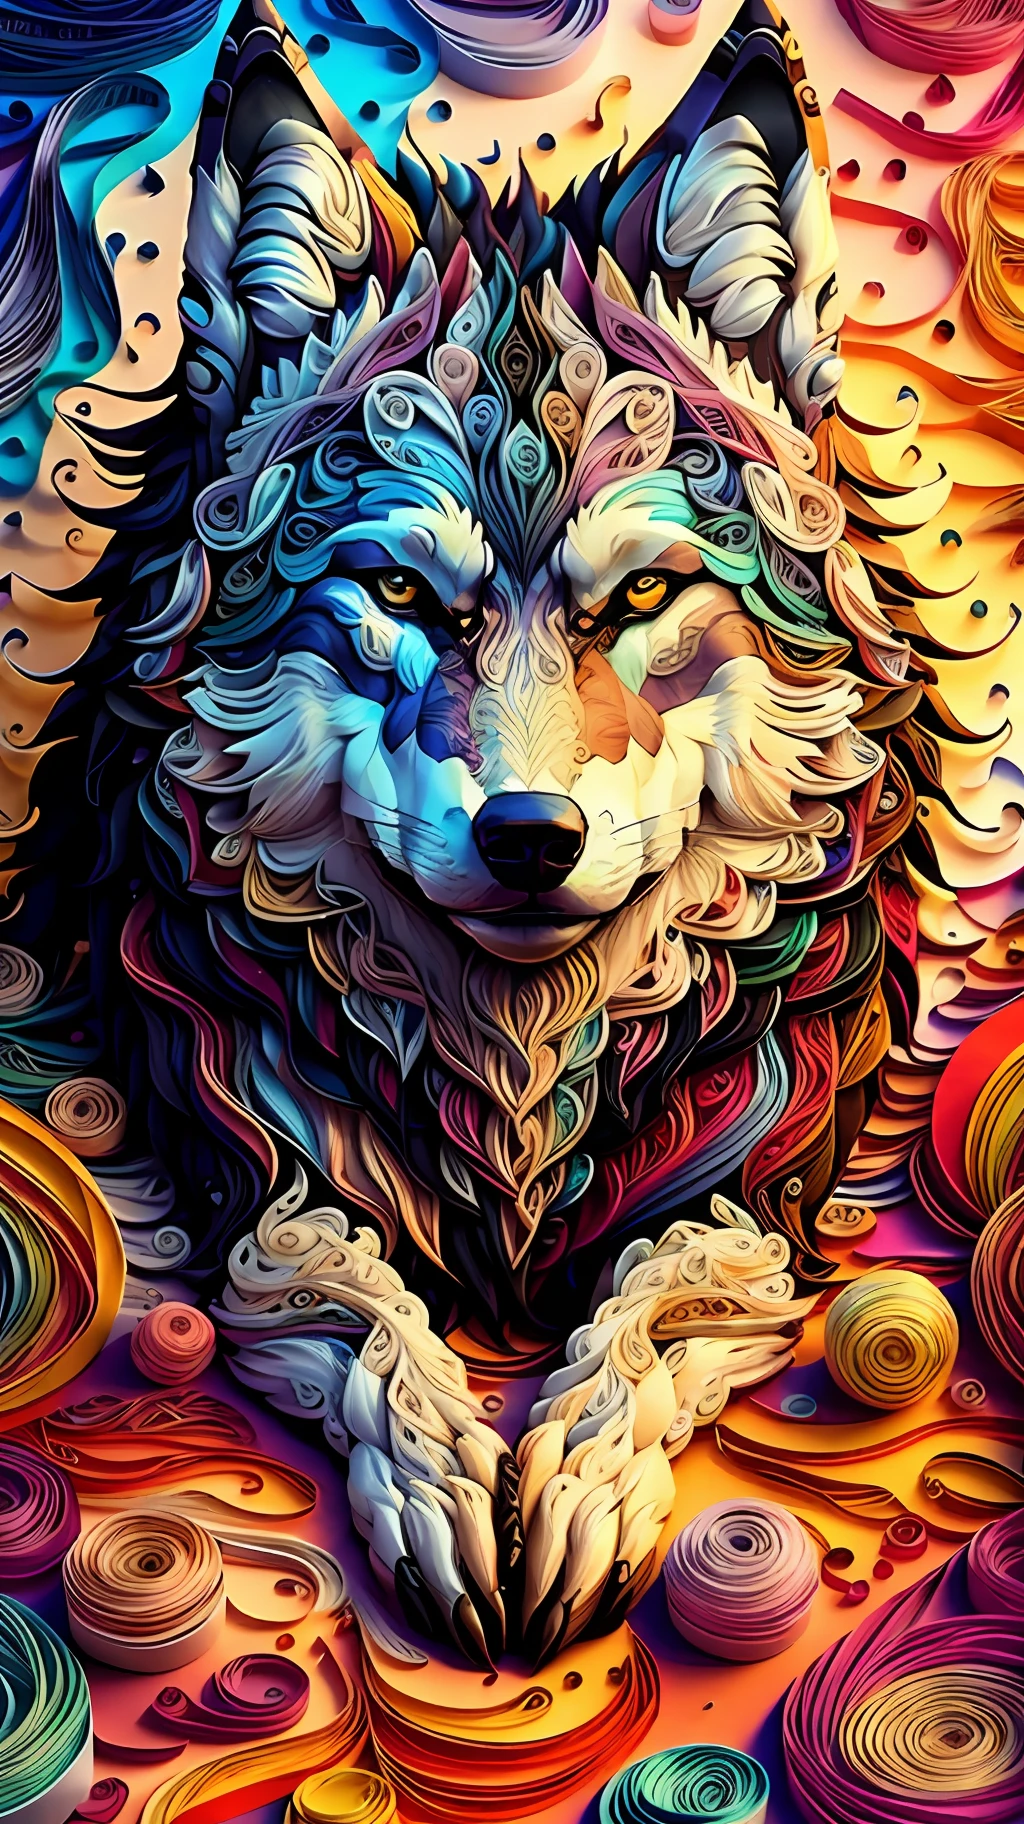 wolf, multi dimensional quilling paper, art, chibi,
yang08k, beautiful, colorful,
Masterpieces, top quality, best quality, official art, beautiful and aesthetic,((8K ultra realistic))